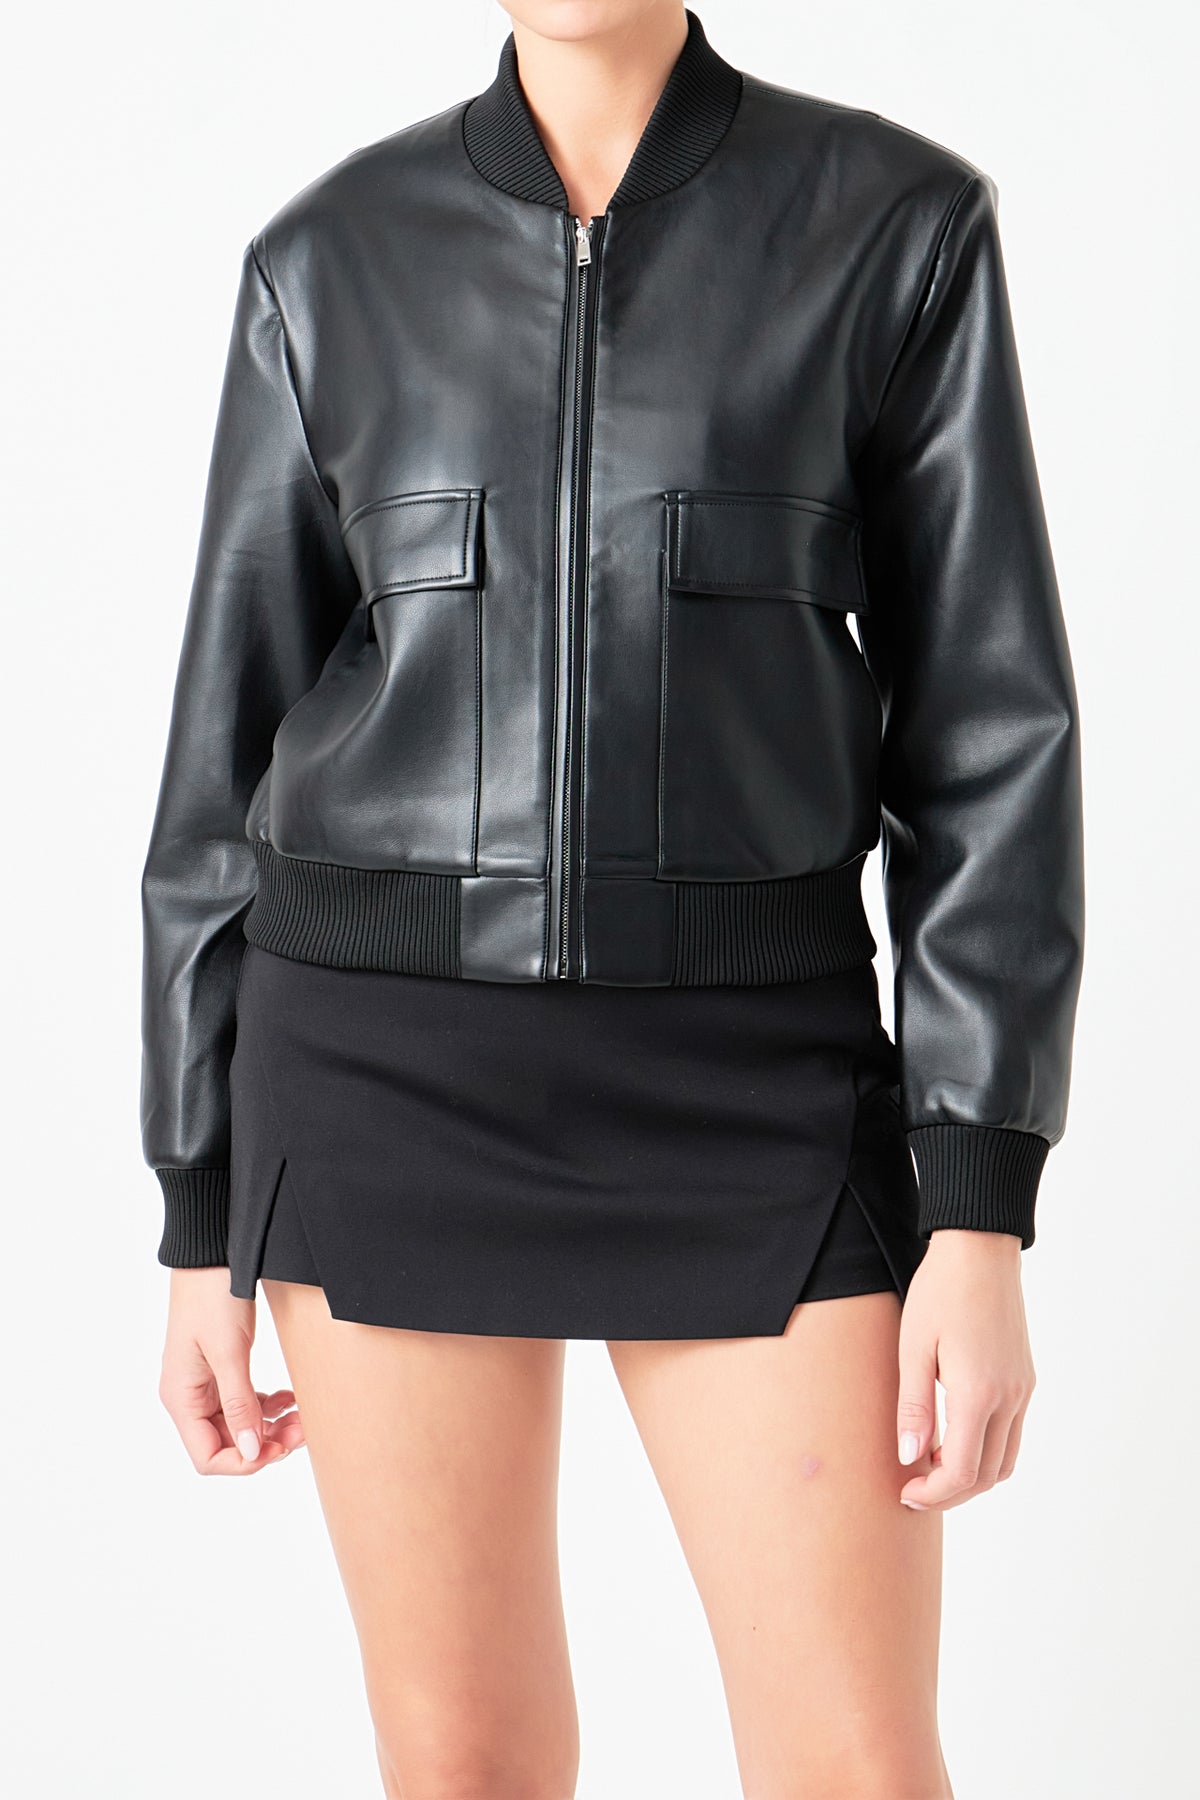 ENDLESS ROSE - Short Pu Leather Bomber Jacket - JACKETS available at Objectrare